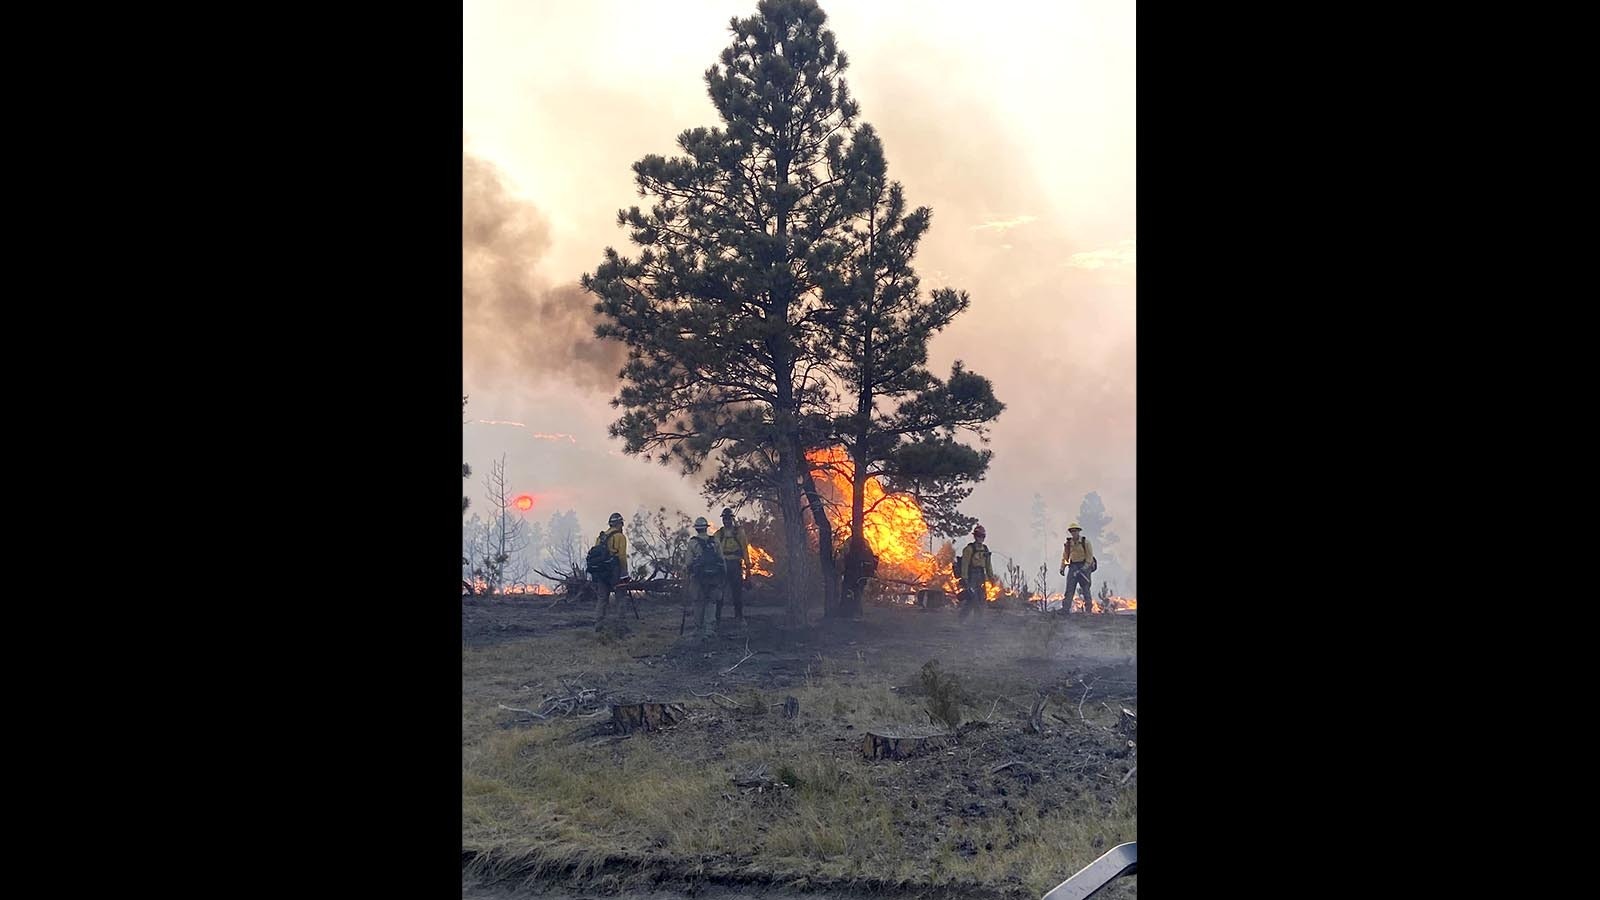 Firefighters work to contain a wildfire near Upton, Wyoming.